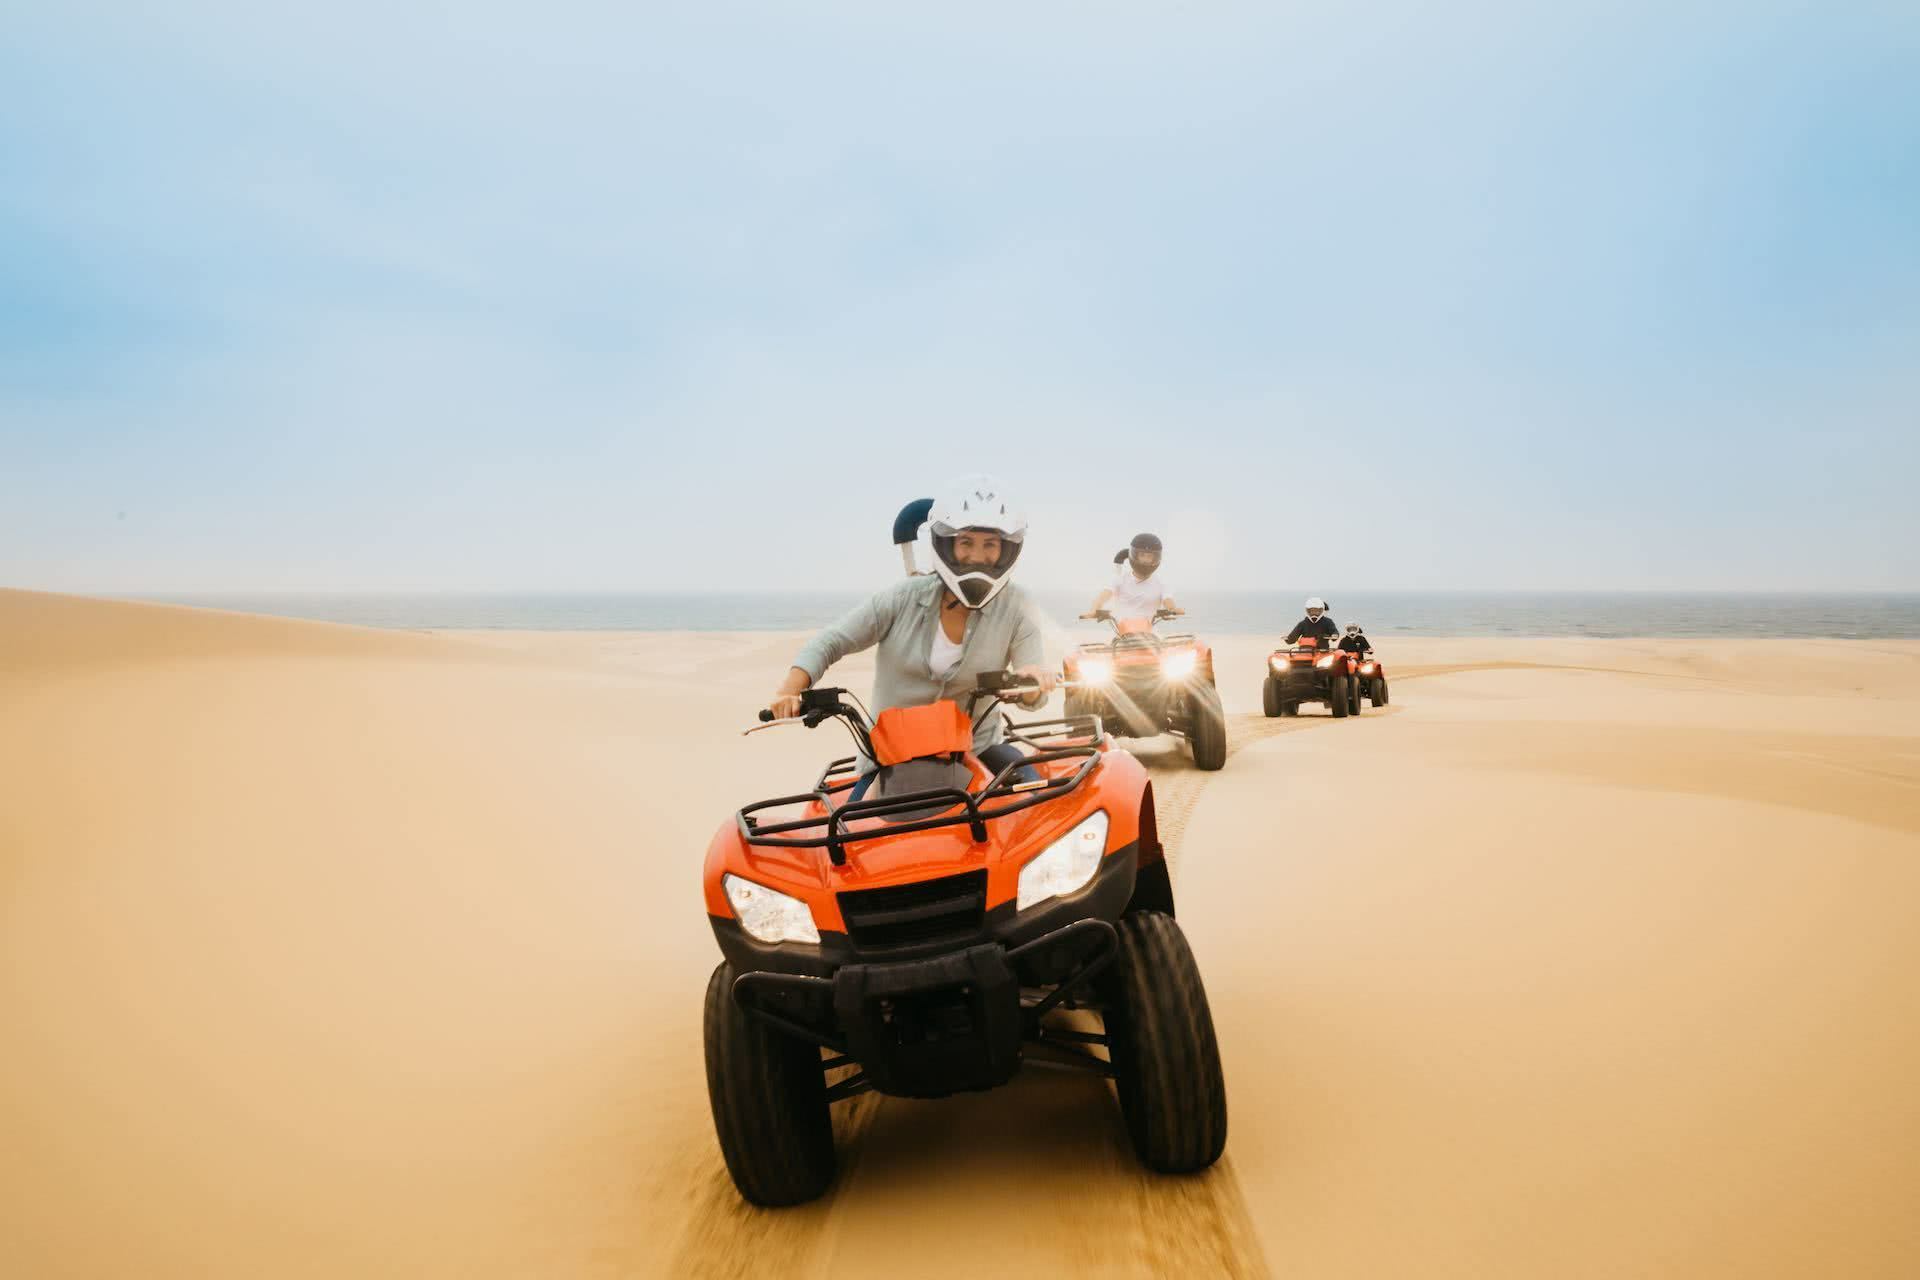 Plan Port Stephens for Your Next Adventure Weekender, photos by DNSW, Stockton sand dunes, quad biking, people